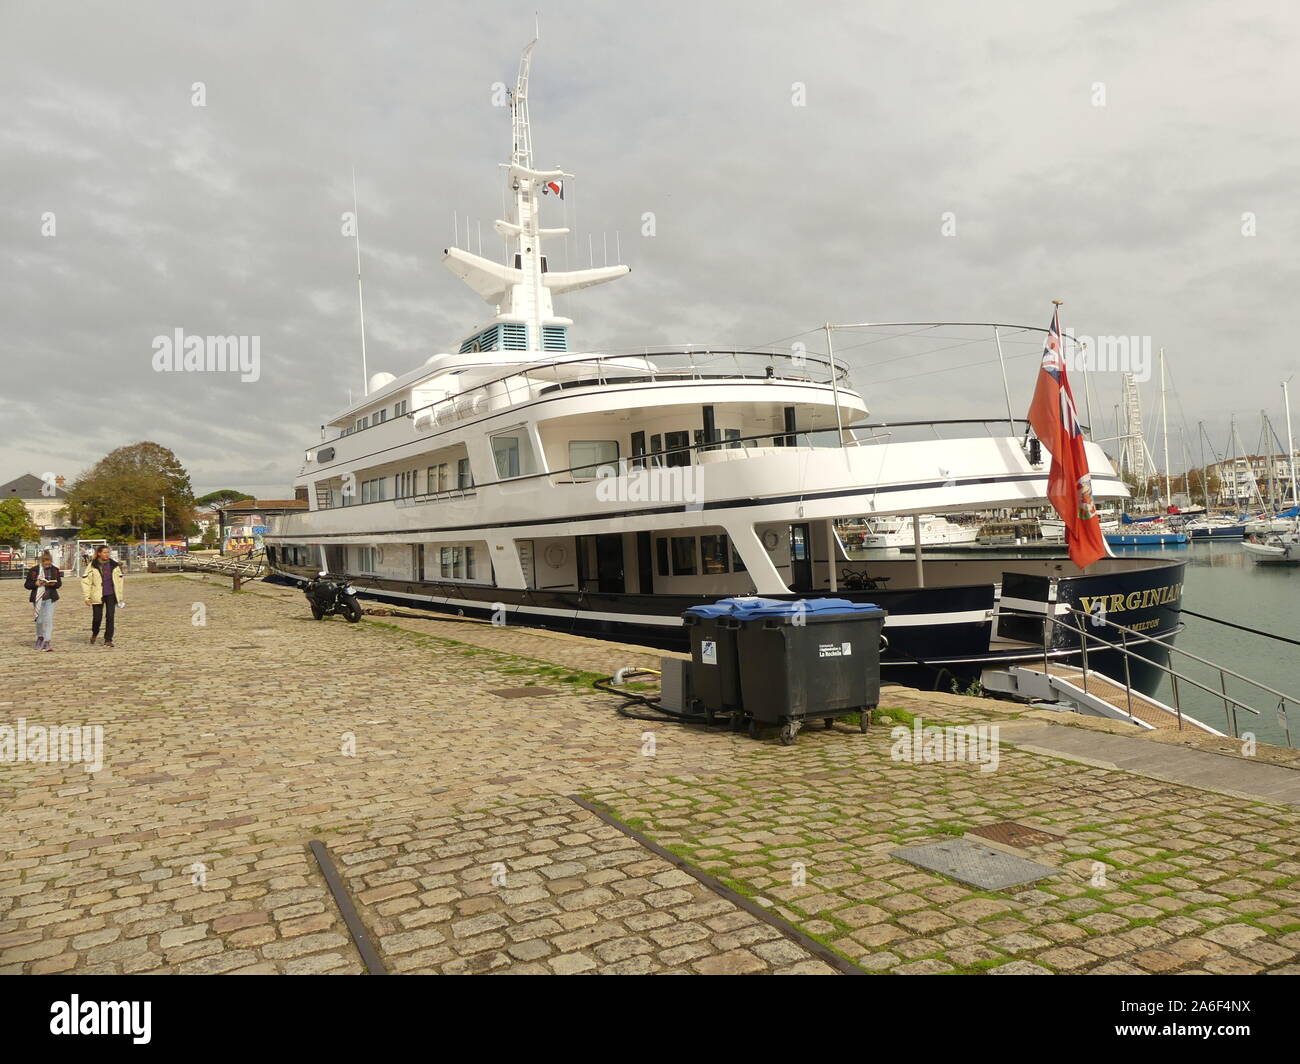 The Yatch Virginian is arrived to La Rochelle, october 21, 2019, to undergo a complete renovation of 6 months by Atlantic Refit Center of La Pallice Stock Photo